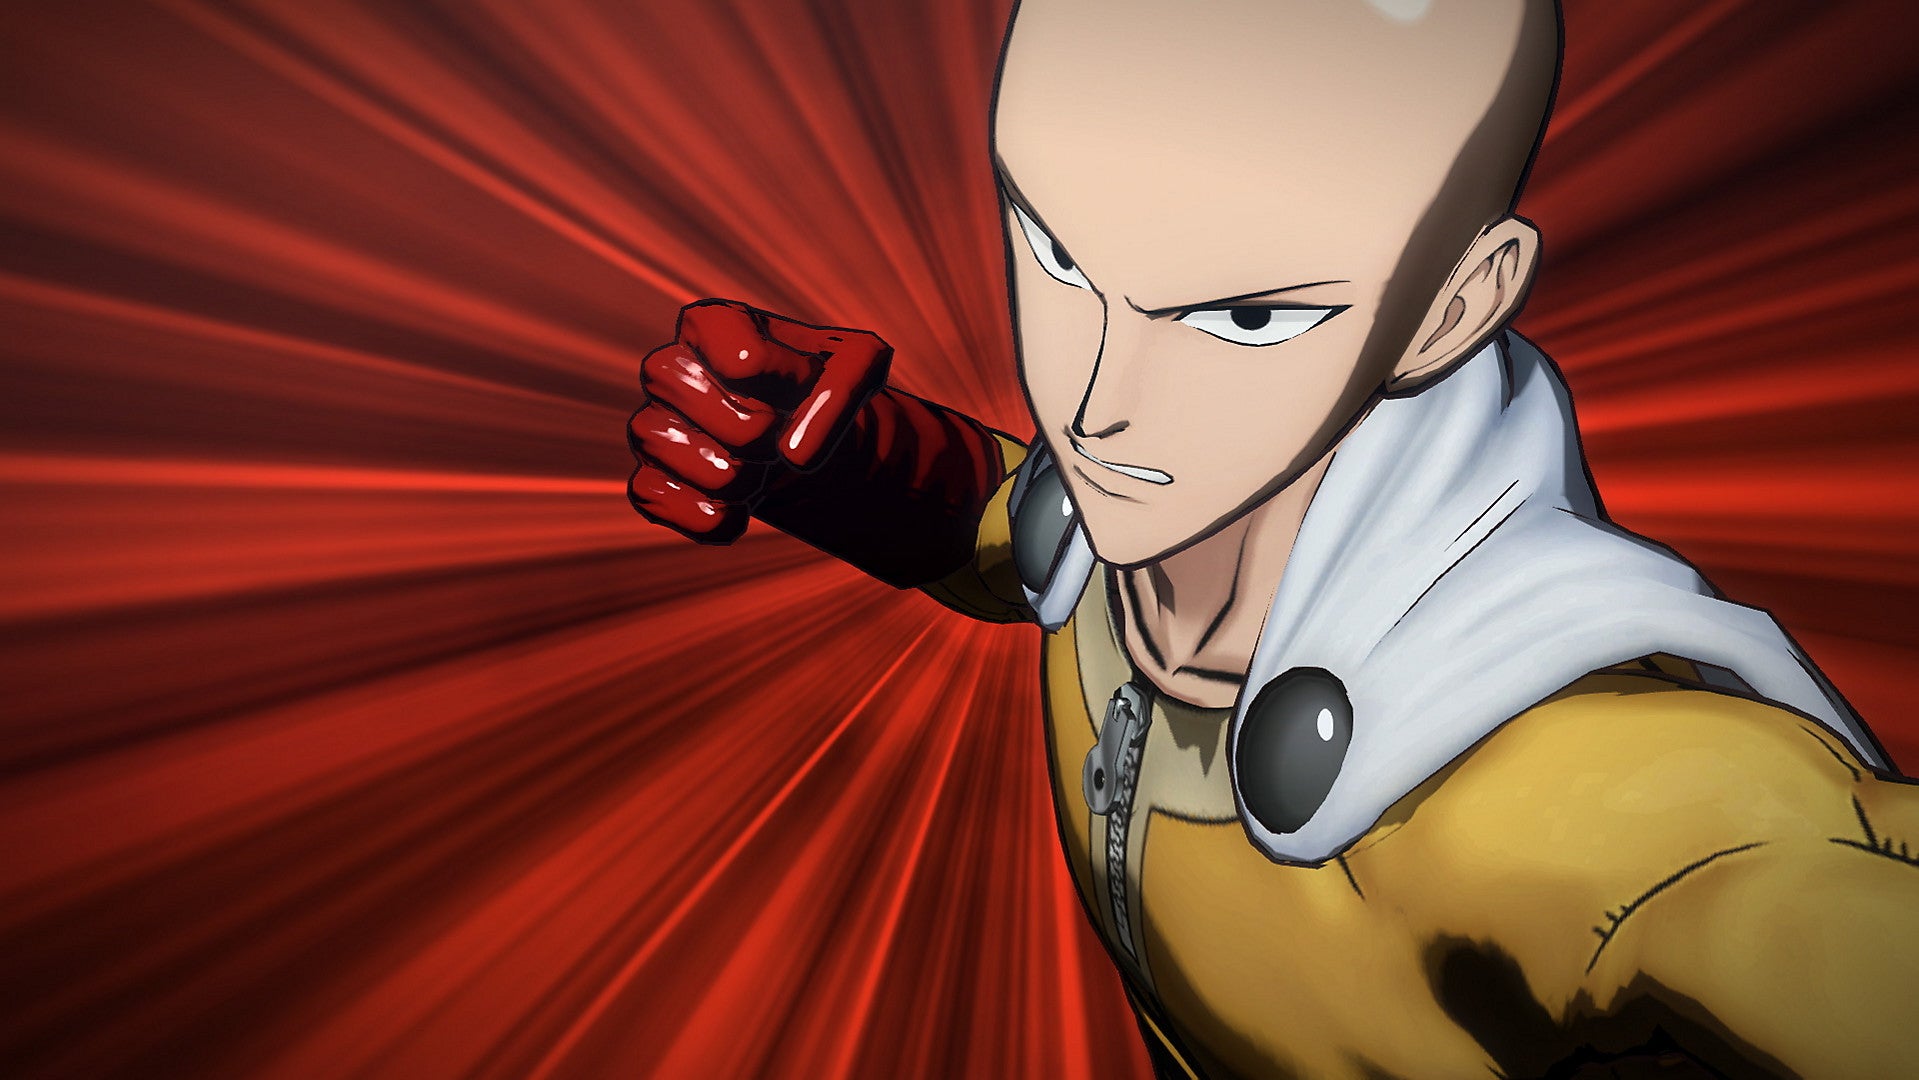 Image for "He's just too strong" - How One Punch Man: A Hero Nobody Knows subverts expectations with Saitama